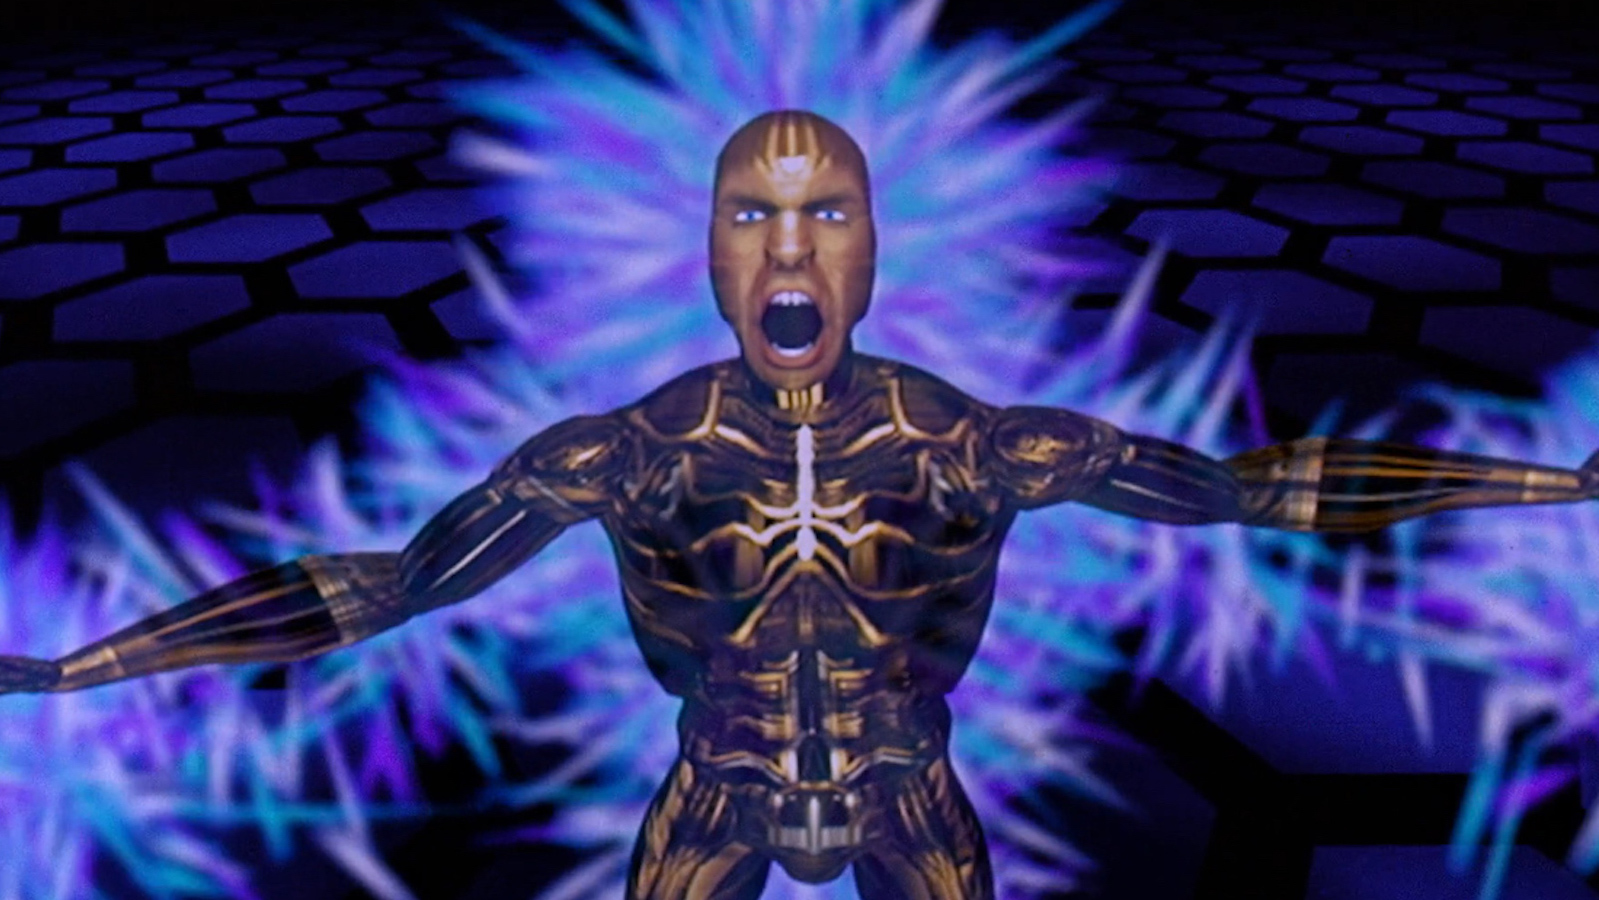 A CGI animated figure with its arms stretched out and wide gaping mouth looking at camera with angry expression